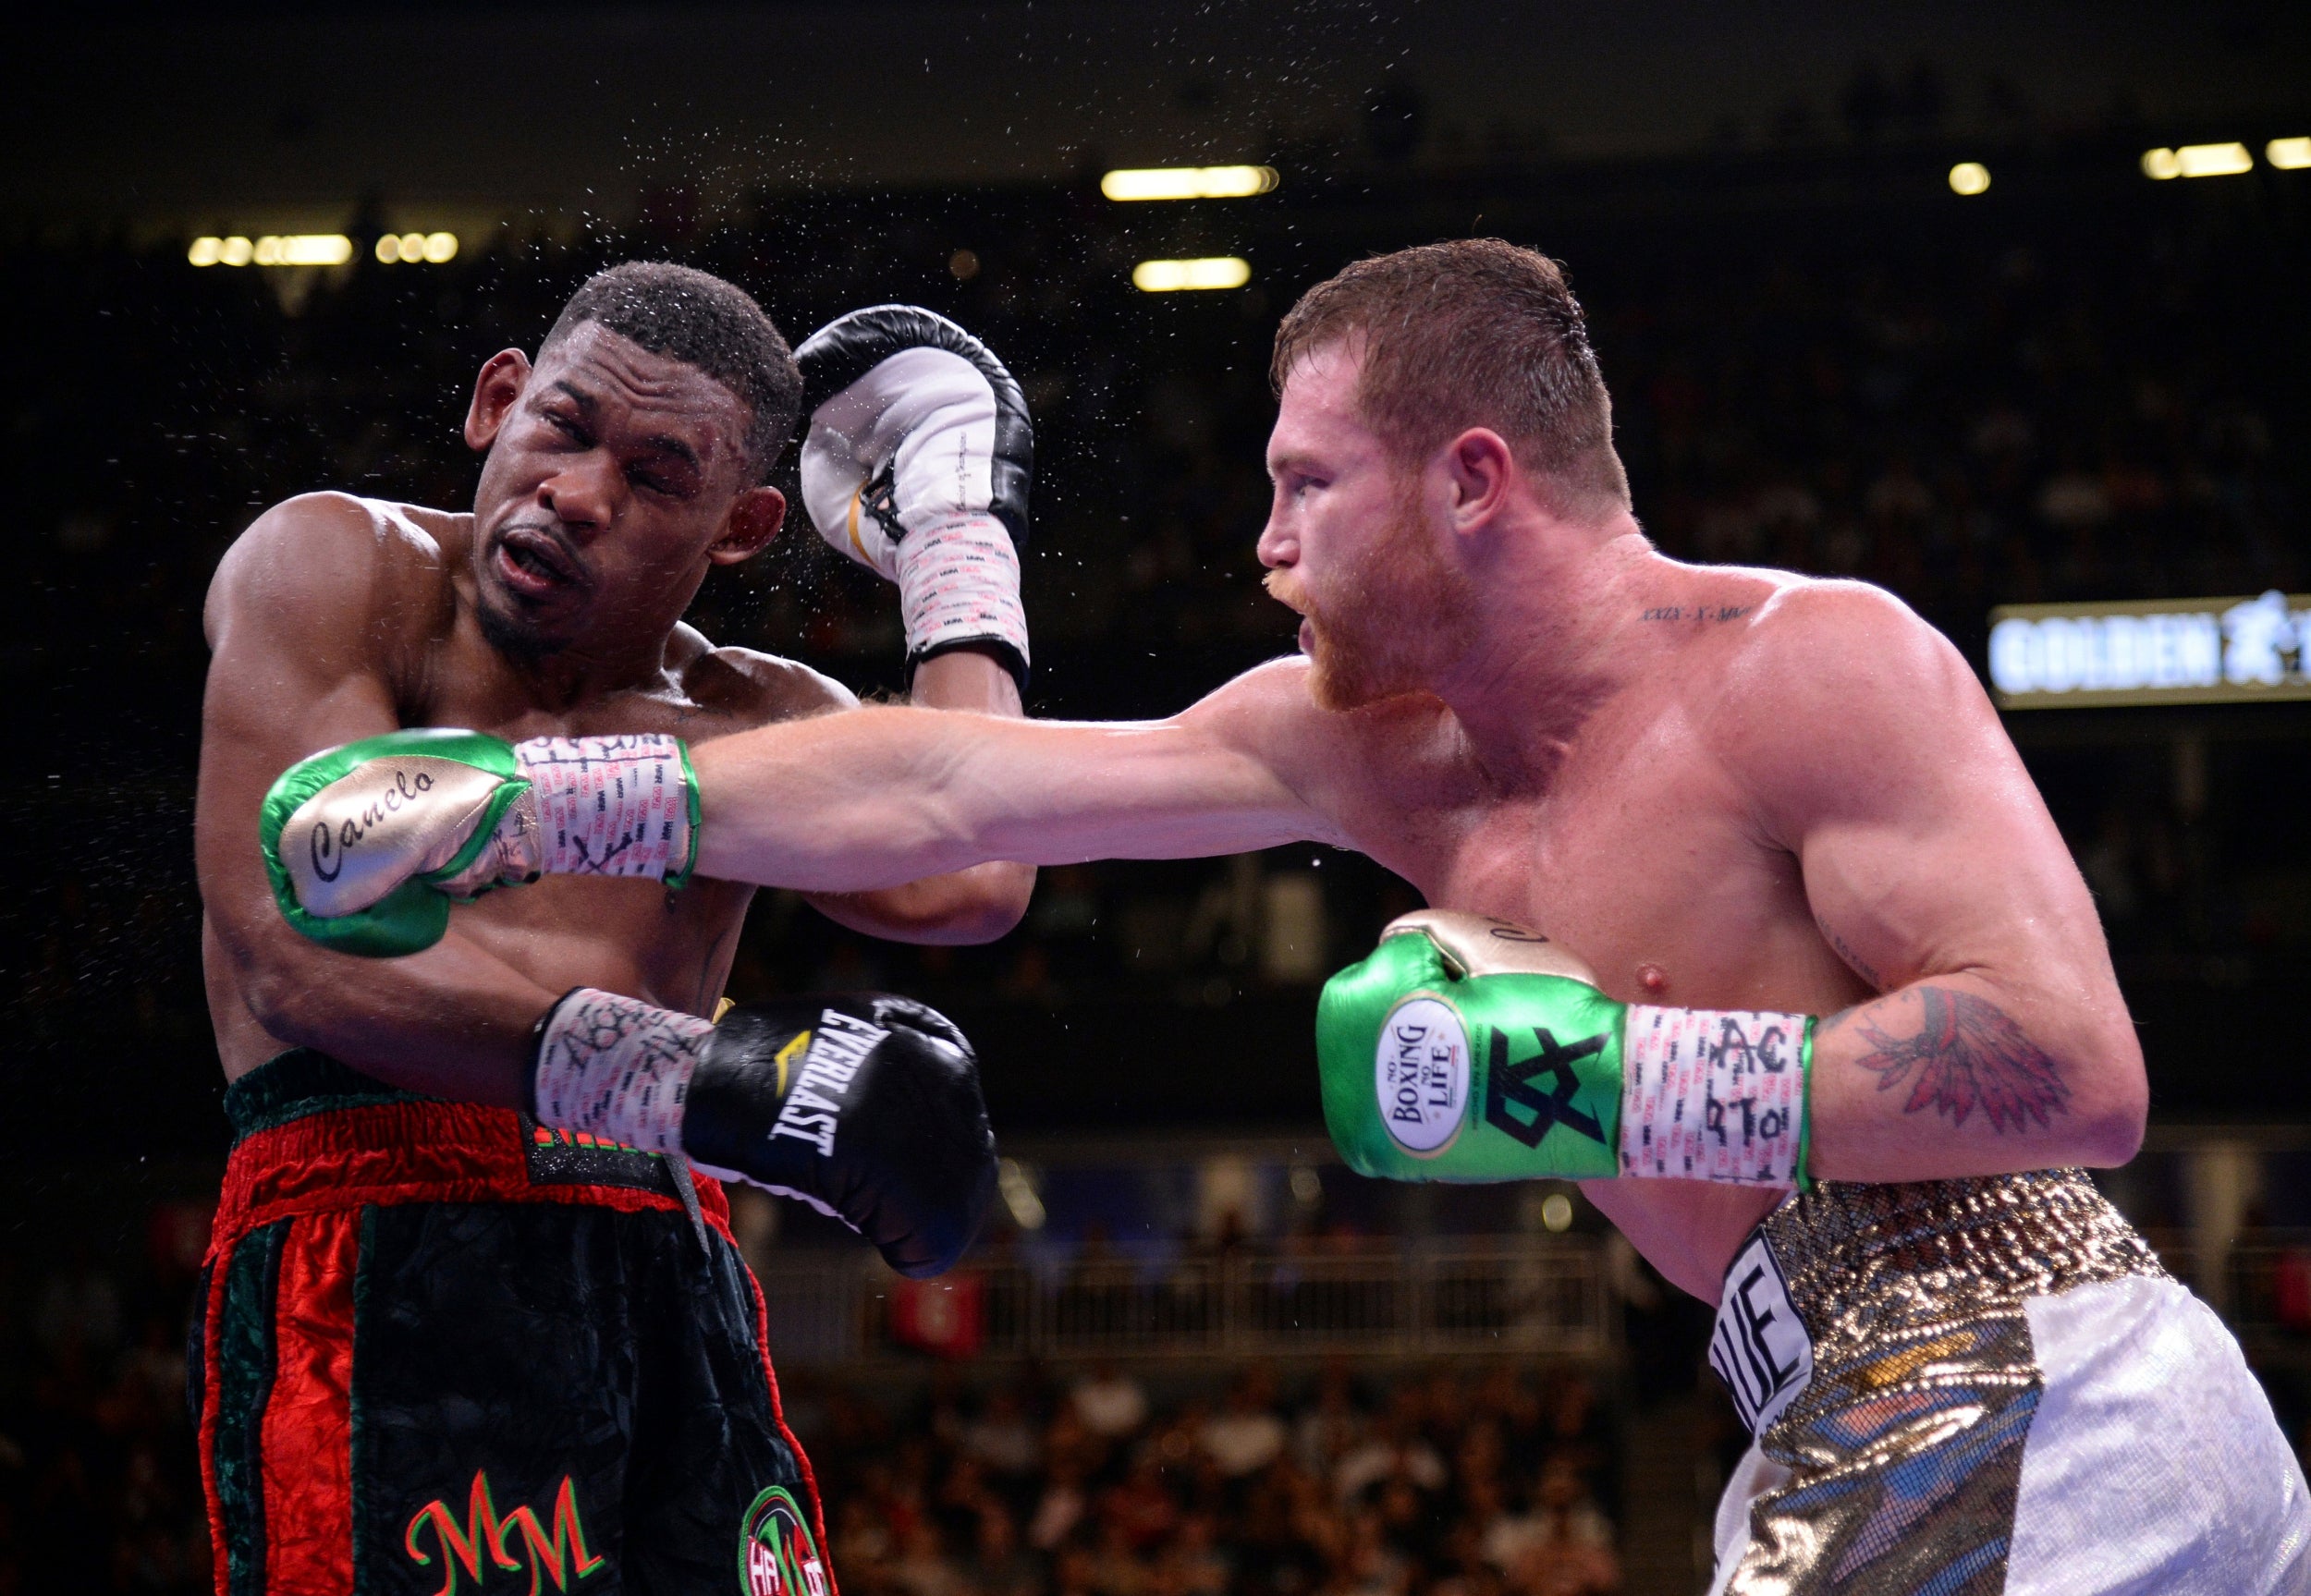 Canelo admitted Jacobs proved a challenge